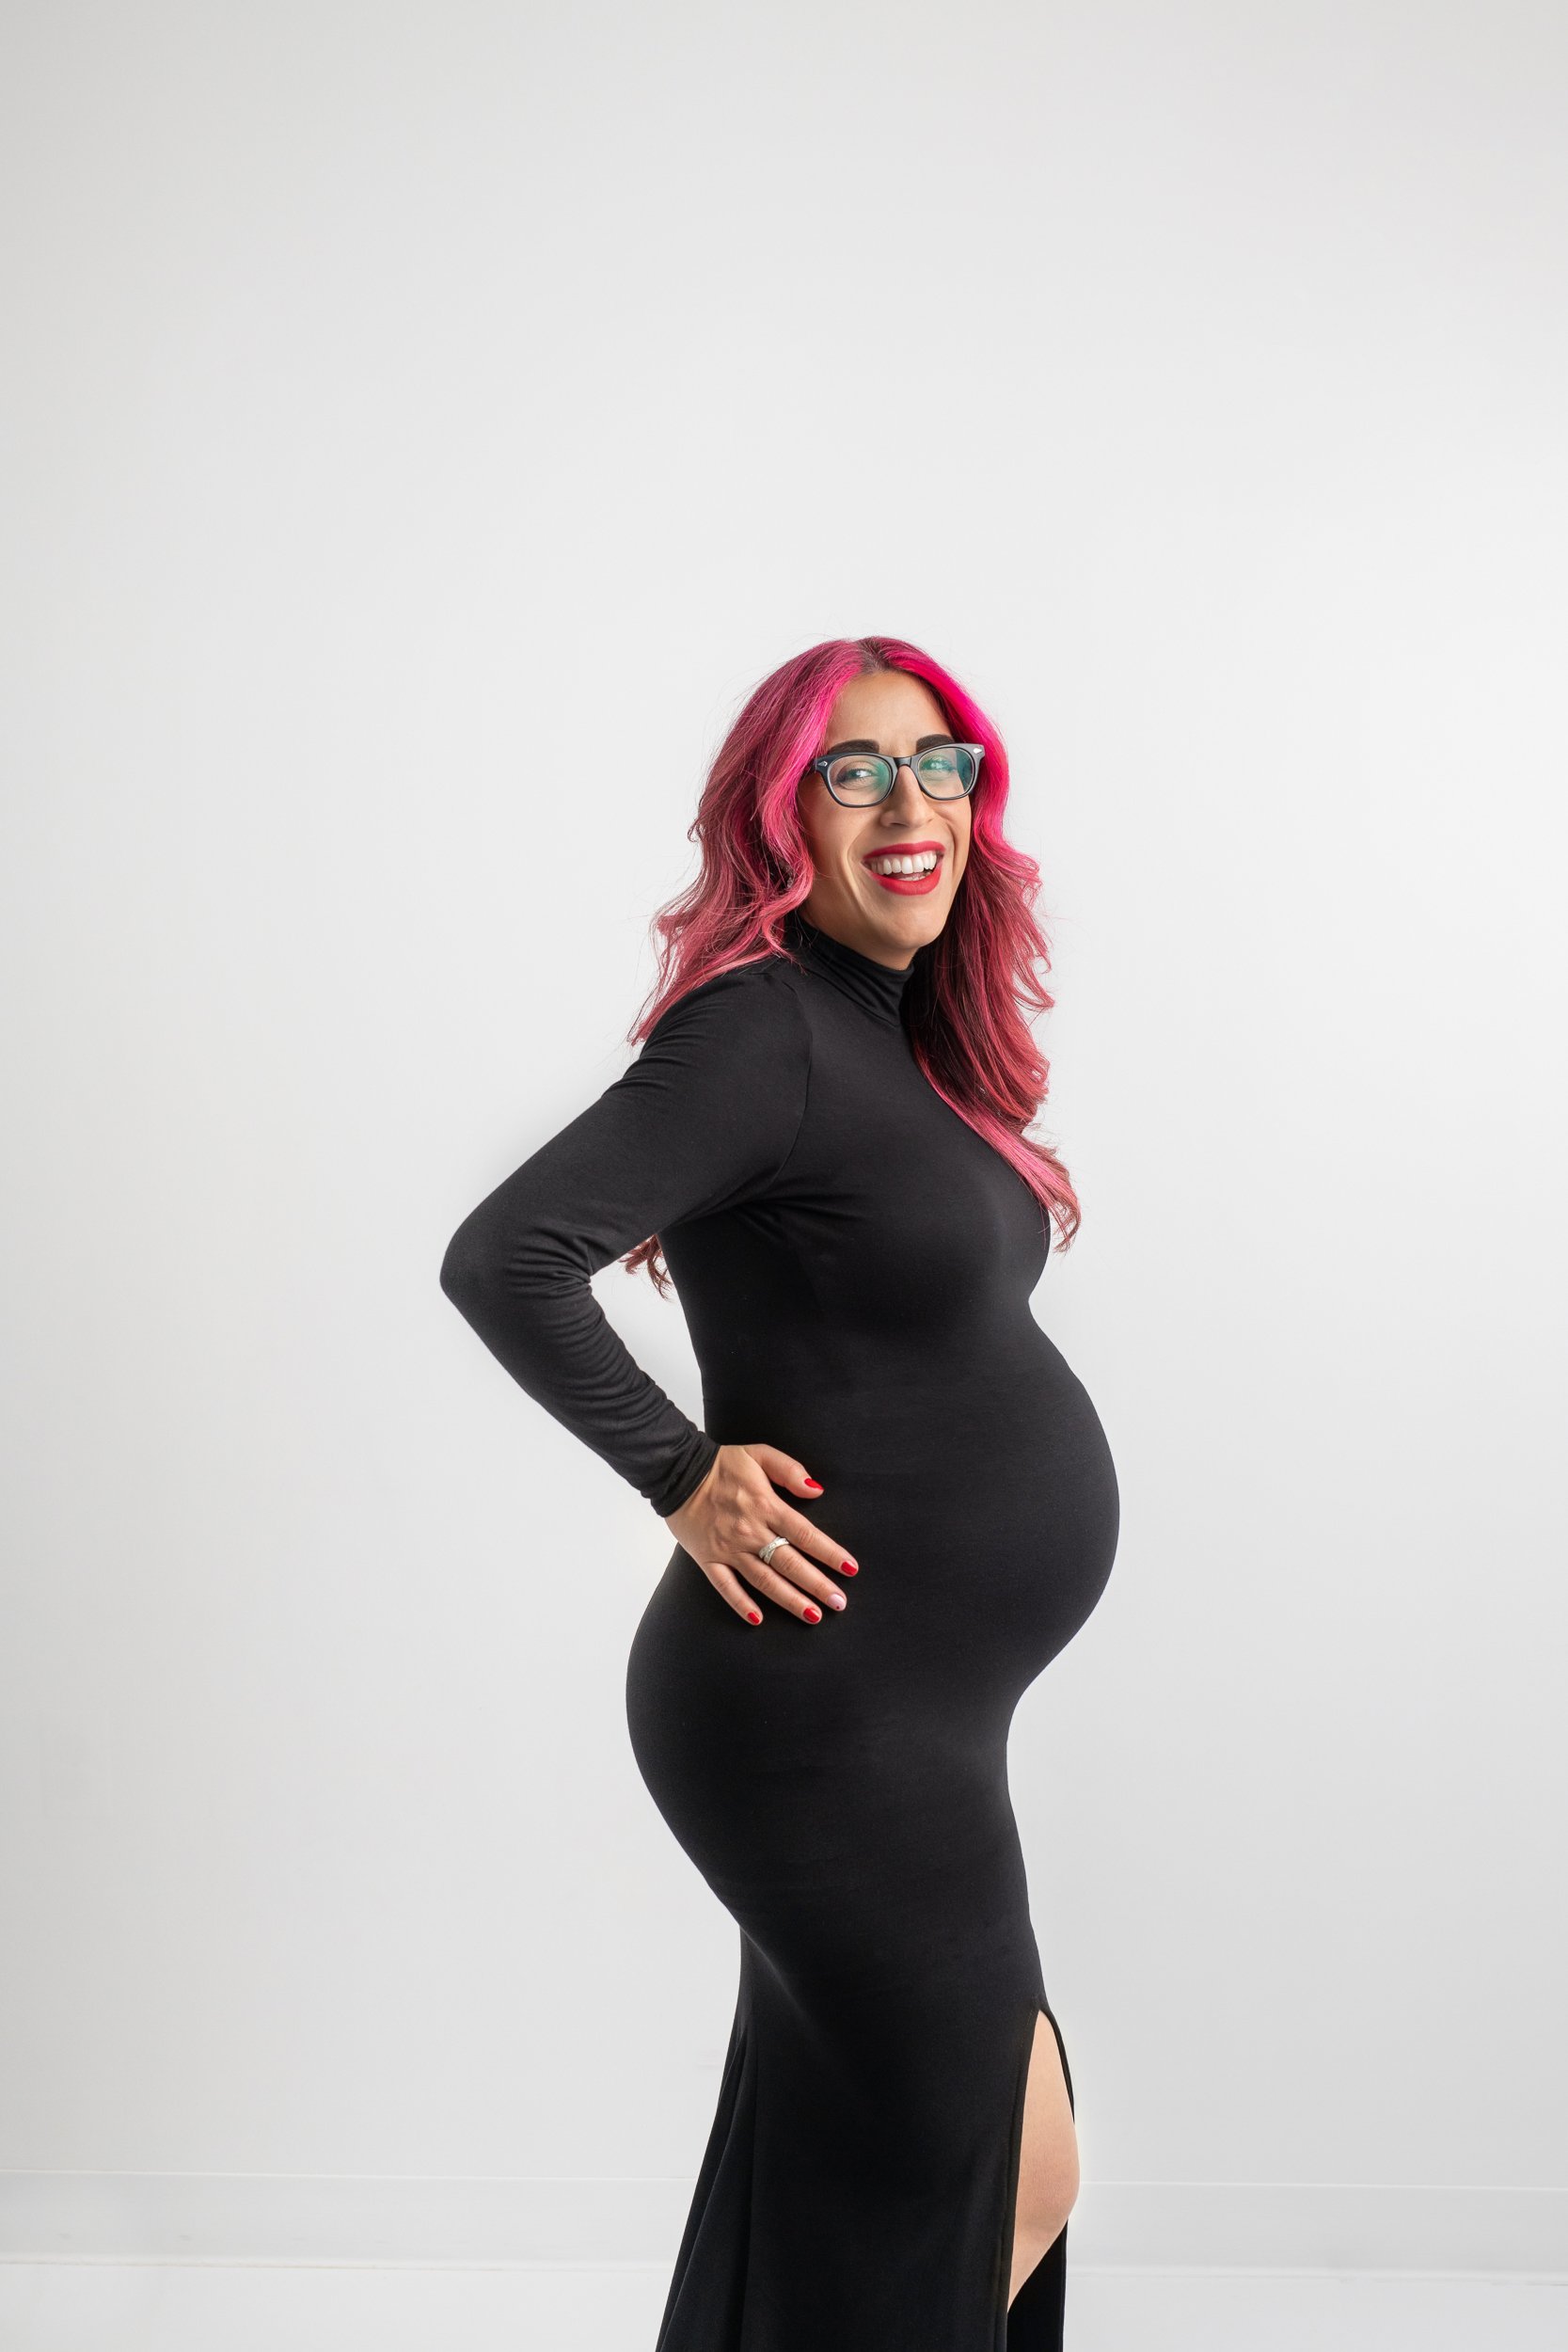  A stylish mom-to-be laughs while holding her baby bump in a New Jersey studio by Nicole Hawkin Photography. laughing mom NJ maternity #NicoleHawkinsPhotography #maternitysession #NJmaternityphotographer #NewJerseyphotographers #maternityphotos 